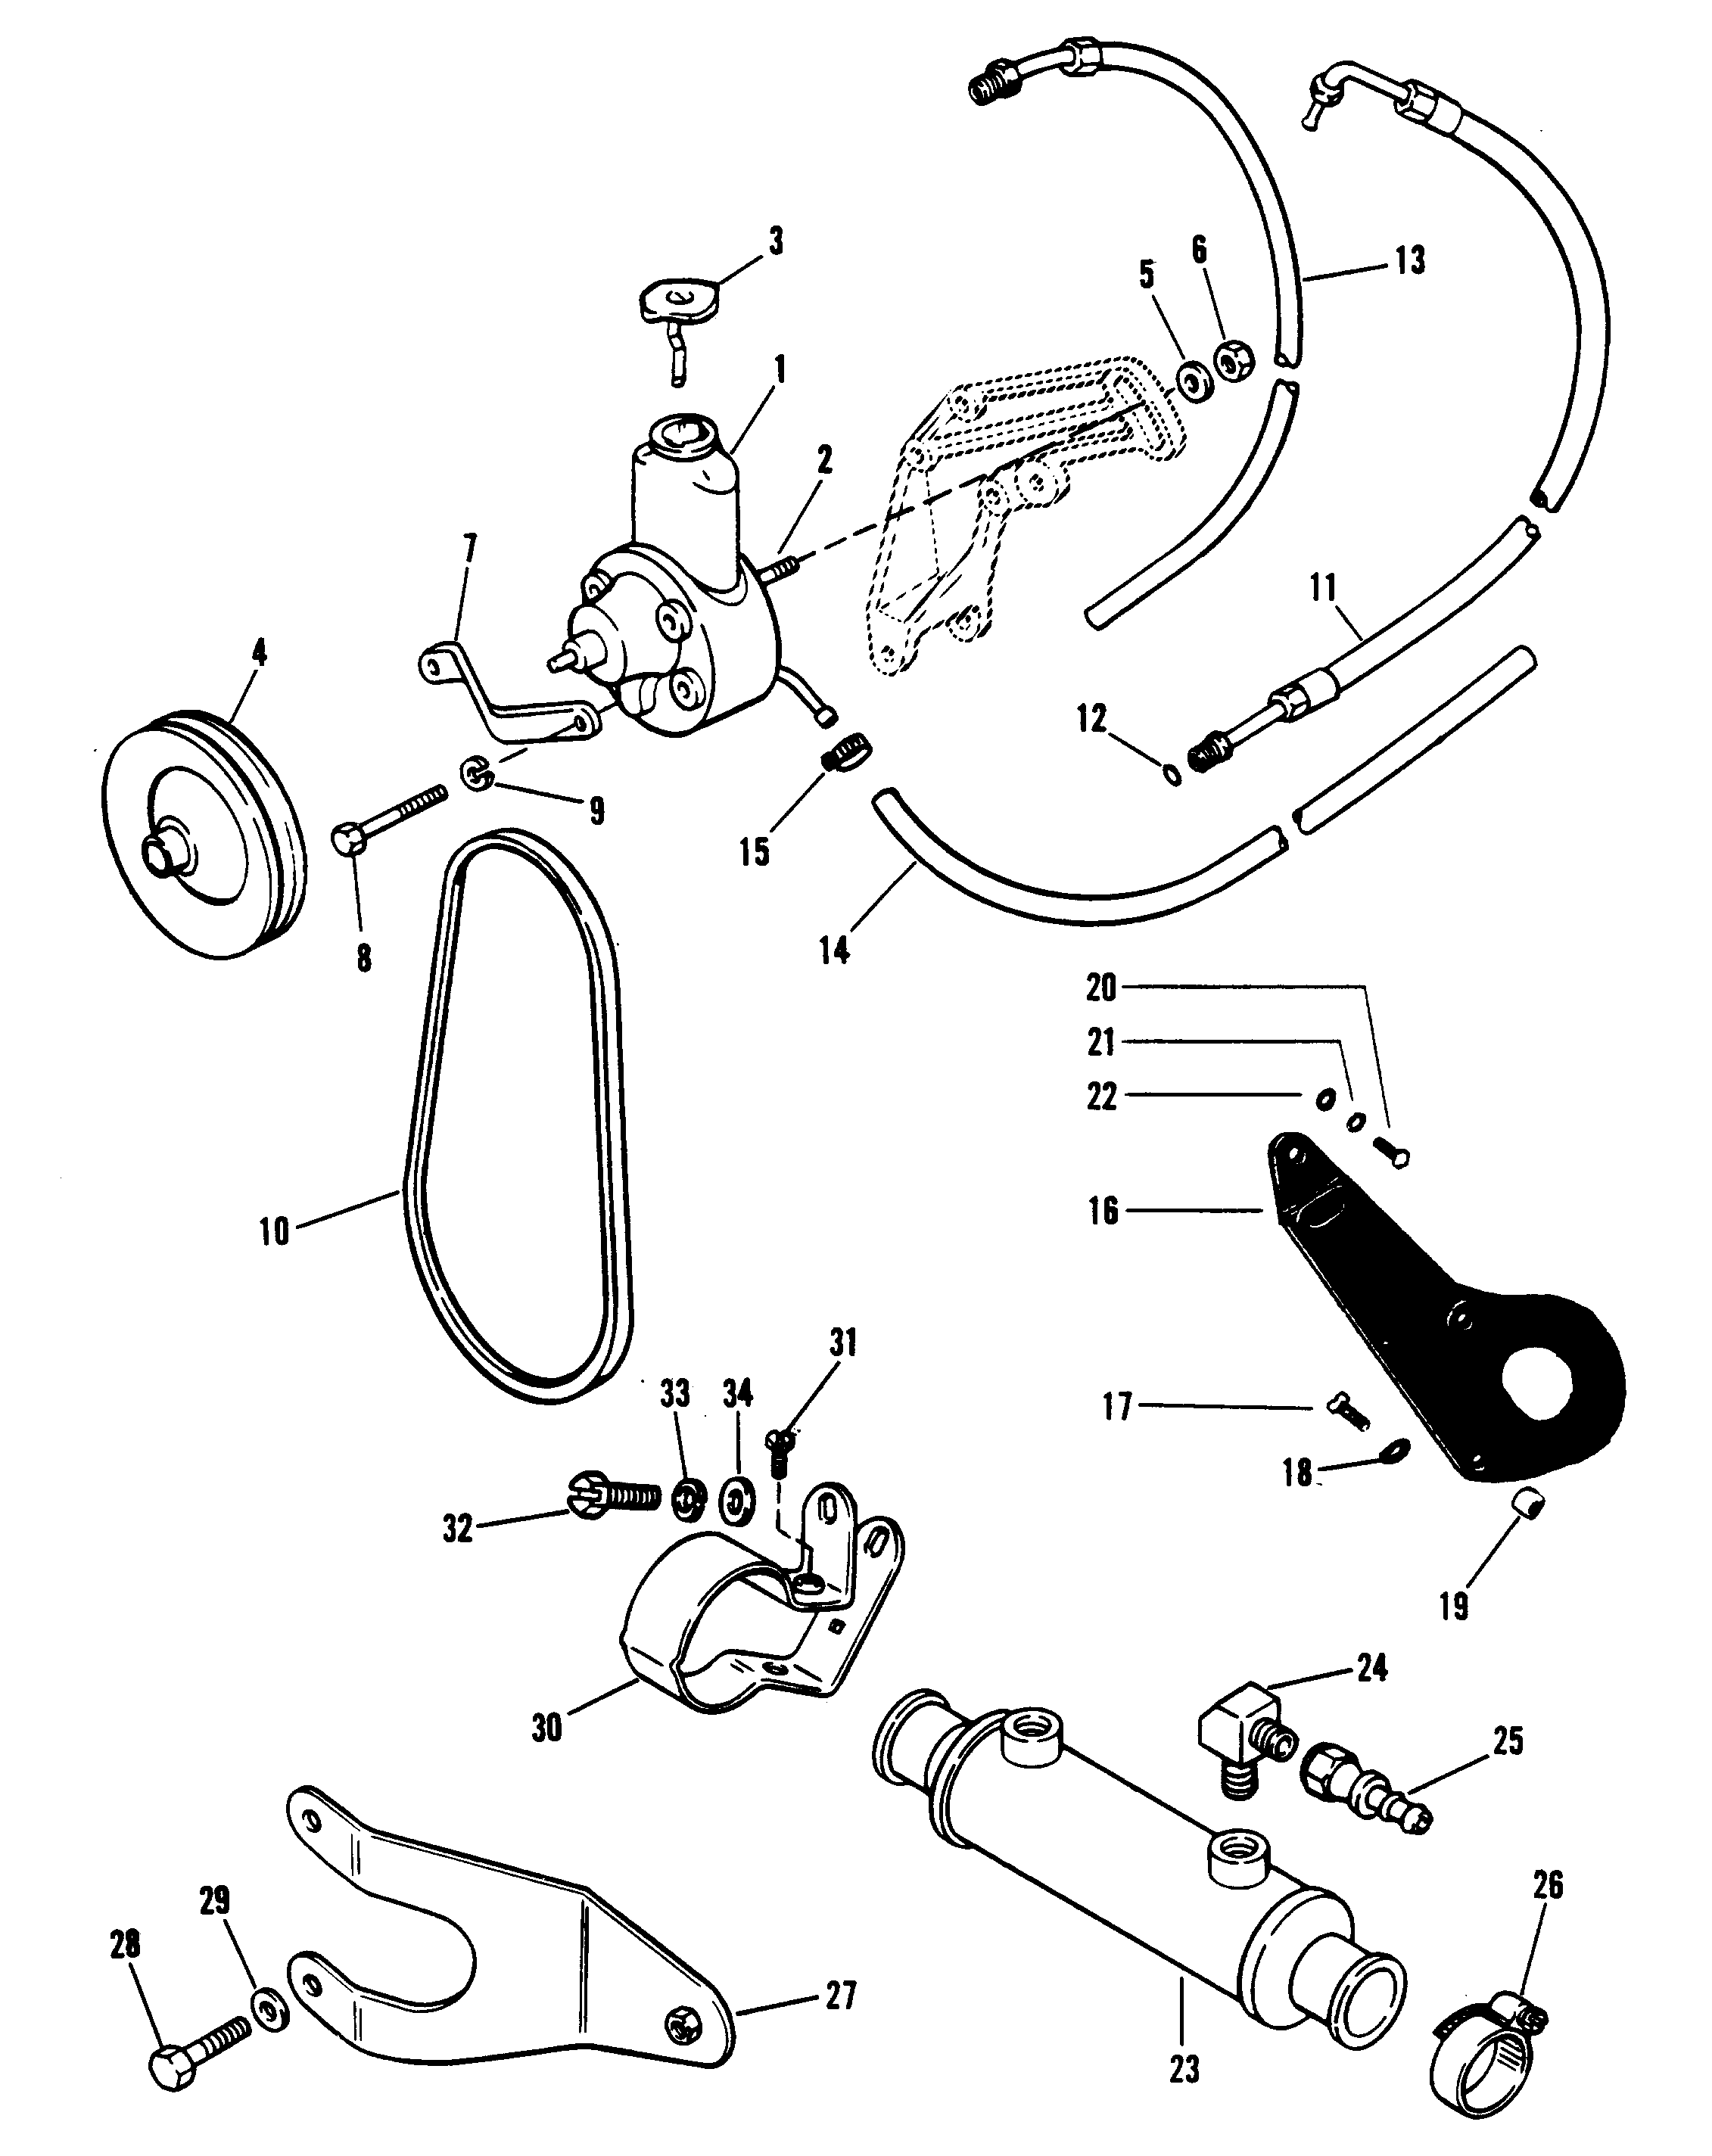 POWER STEERING COMPONENTS(M0031-022)